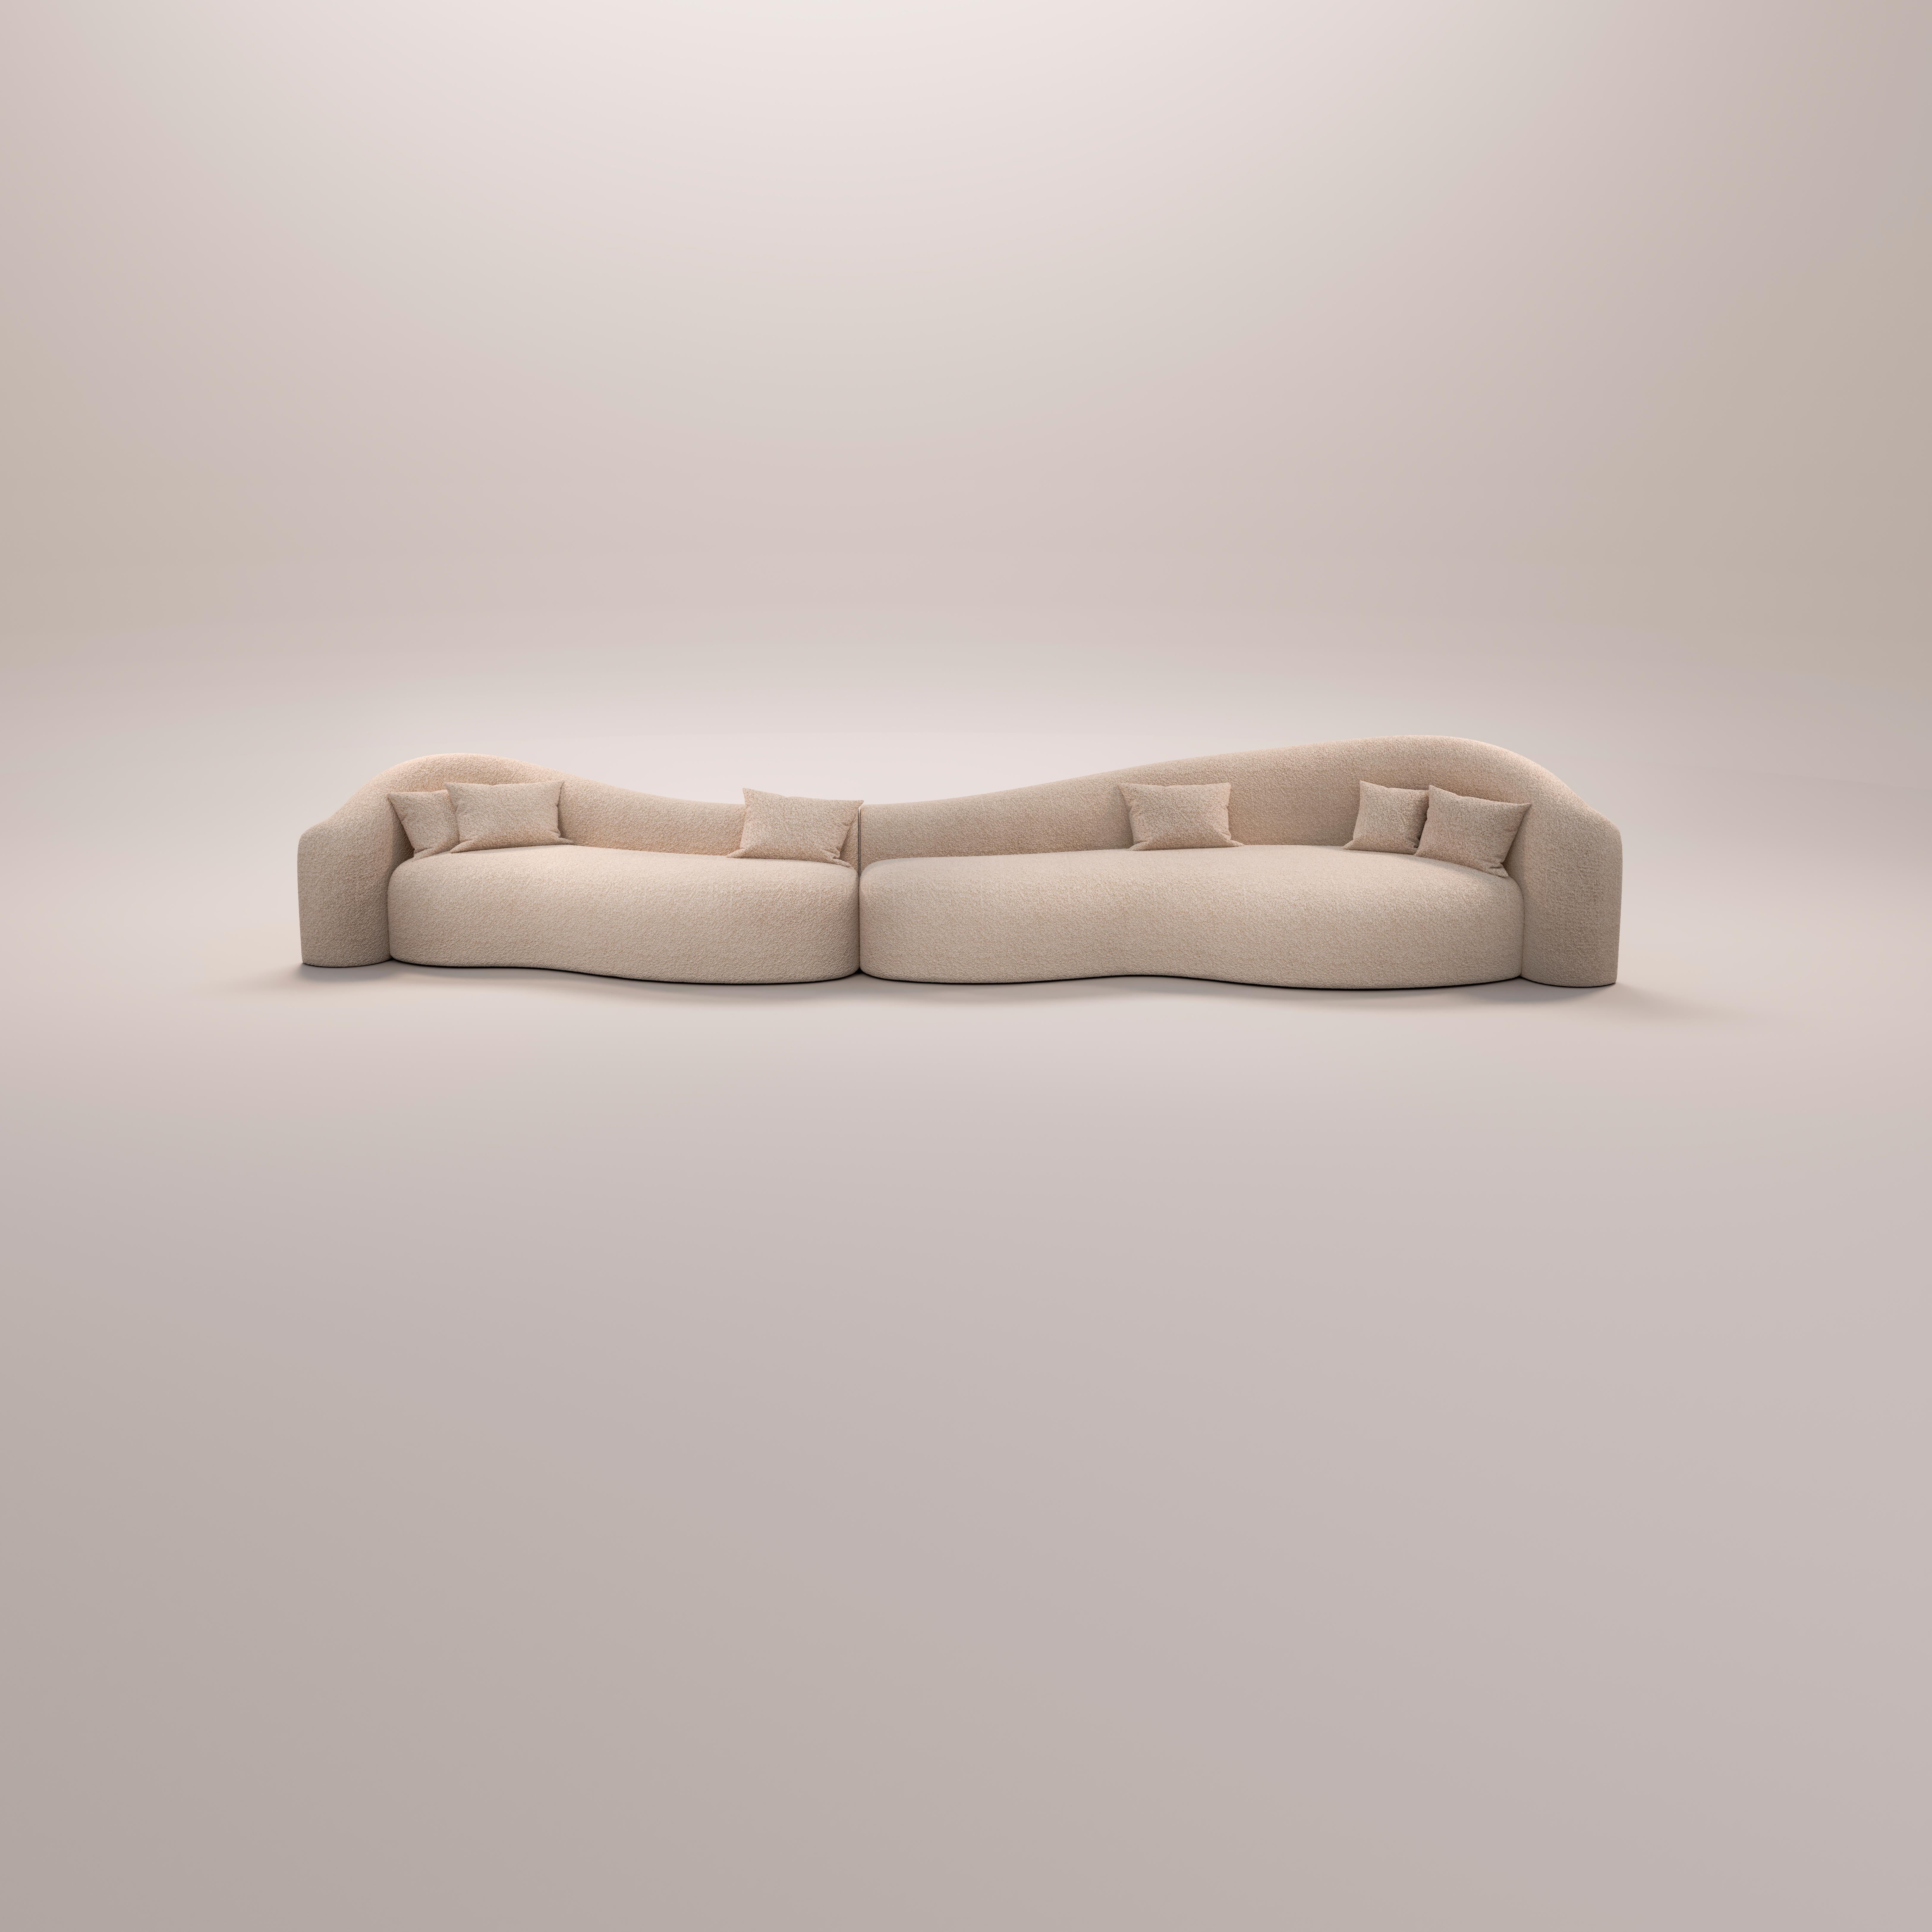 Baïne Sand Sofa by Jérôme Bugara
Limited Edition Of 25 Pieces.
Dimensions: D 100 x W 550 x H 91,5 cm. SH: 45 cm.
Materials: Dedar Milano Karakorum fabric.

Signed, serial number and certificate of Authenticity. 6 cushions are included. Also